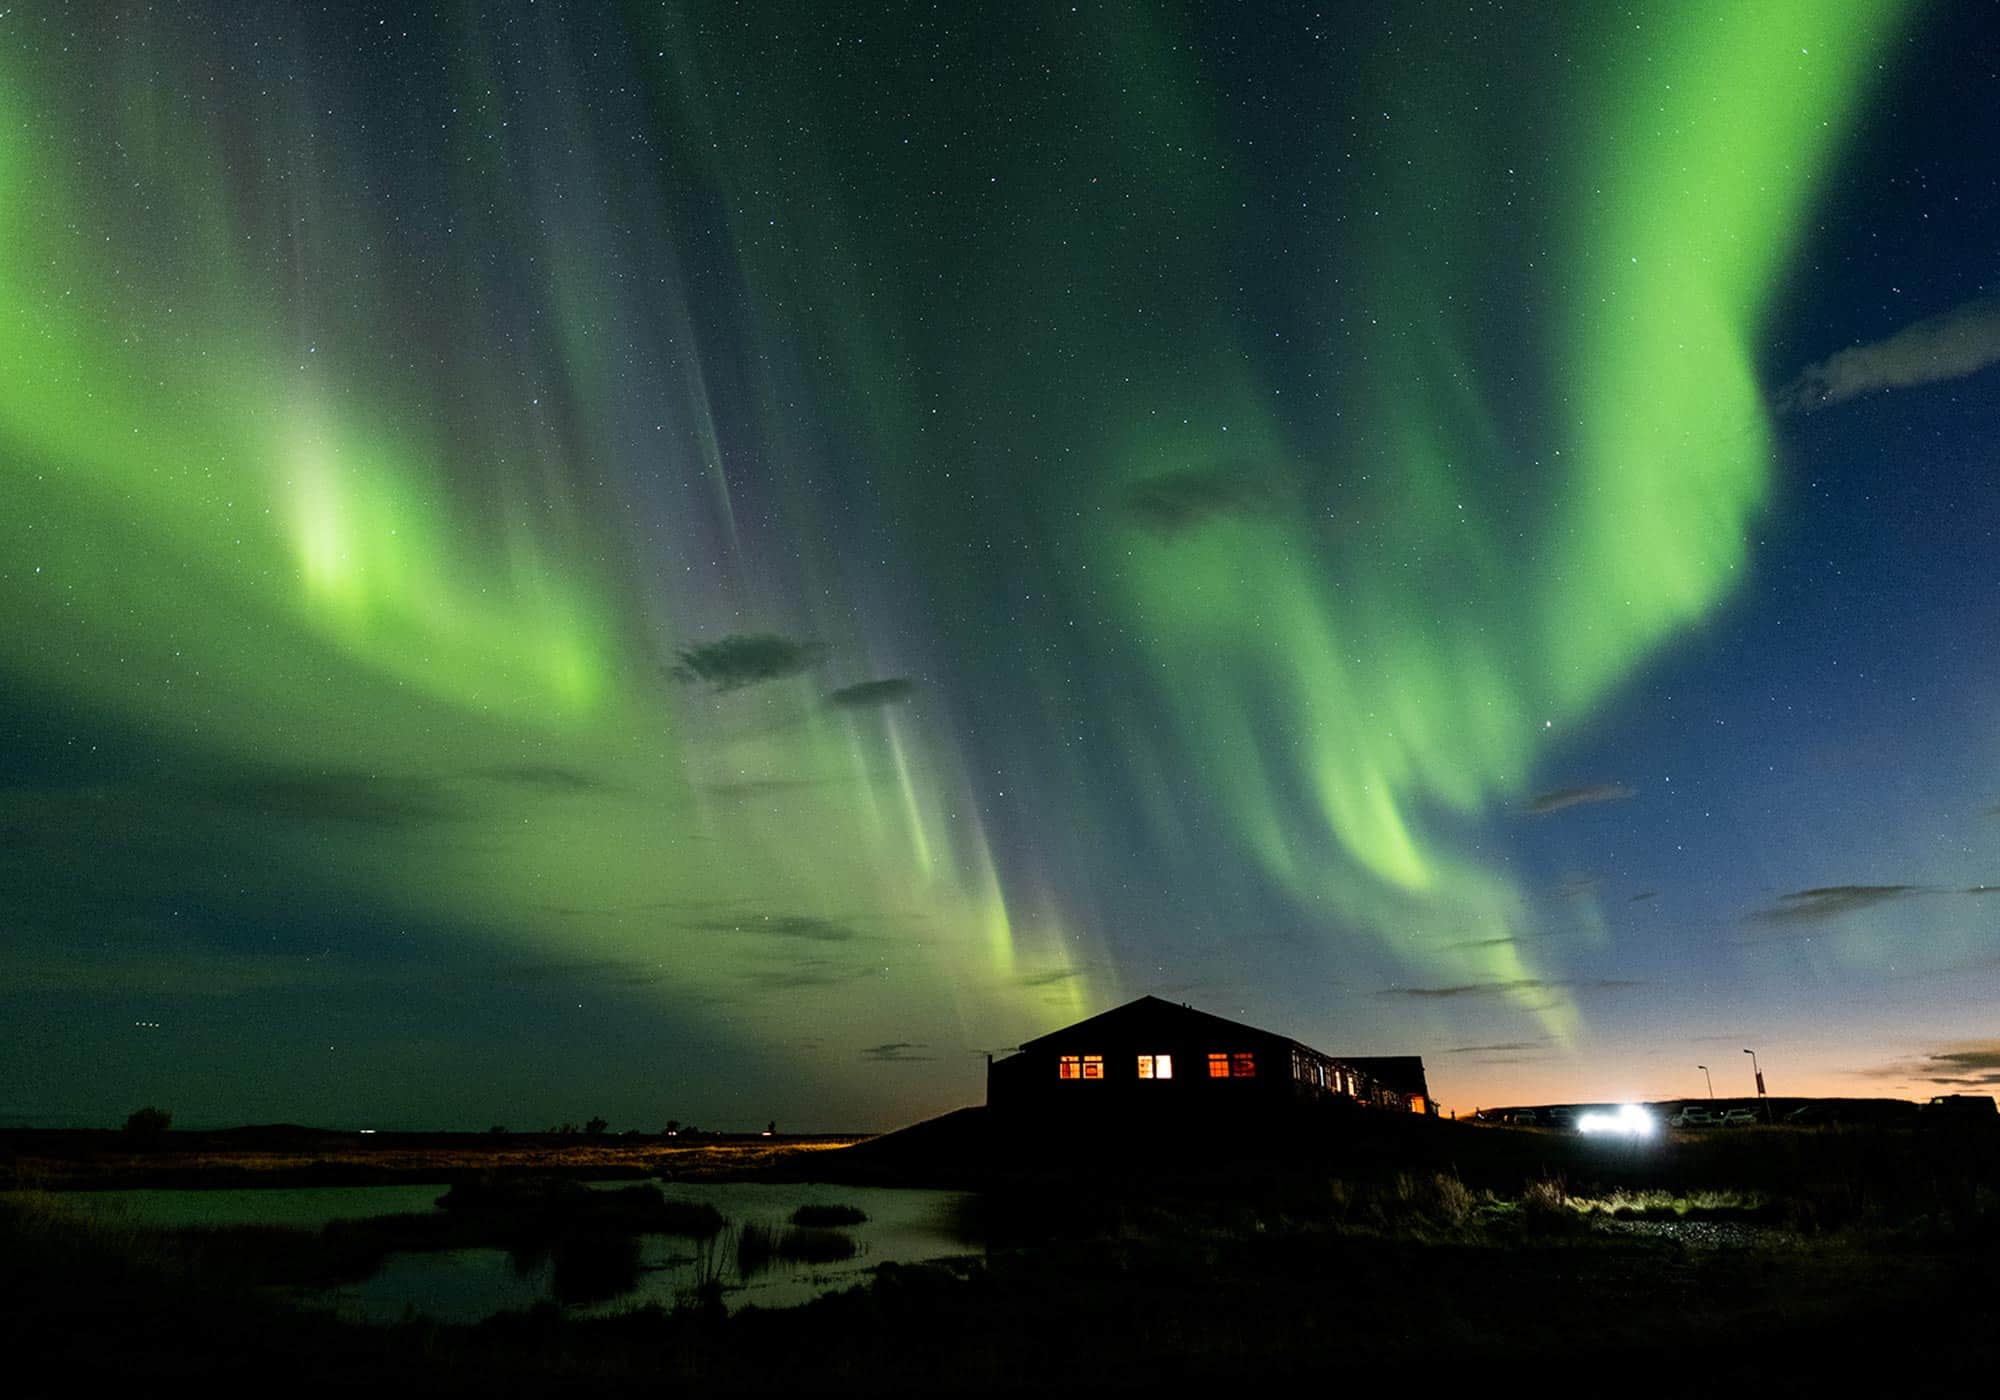 Green northern lights in a starry night sky above the Hotel Rangá Observatory.